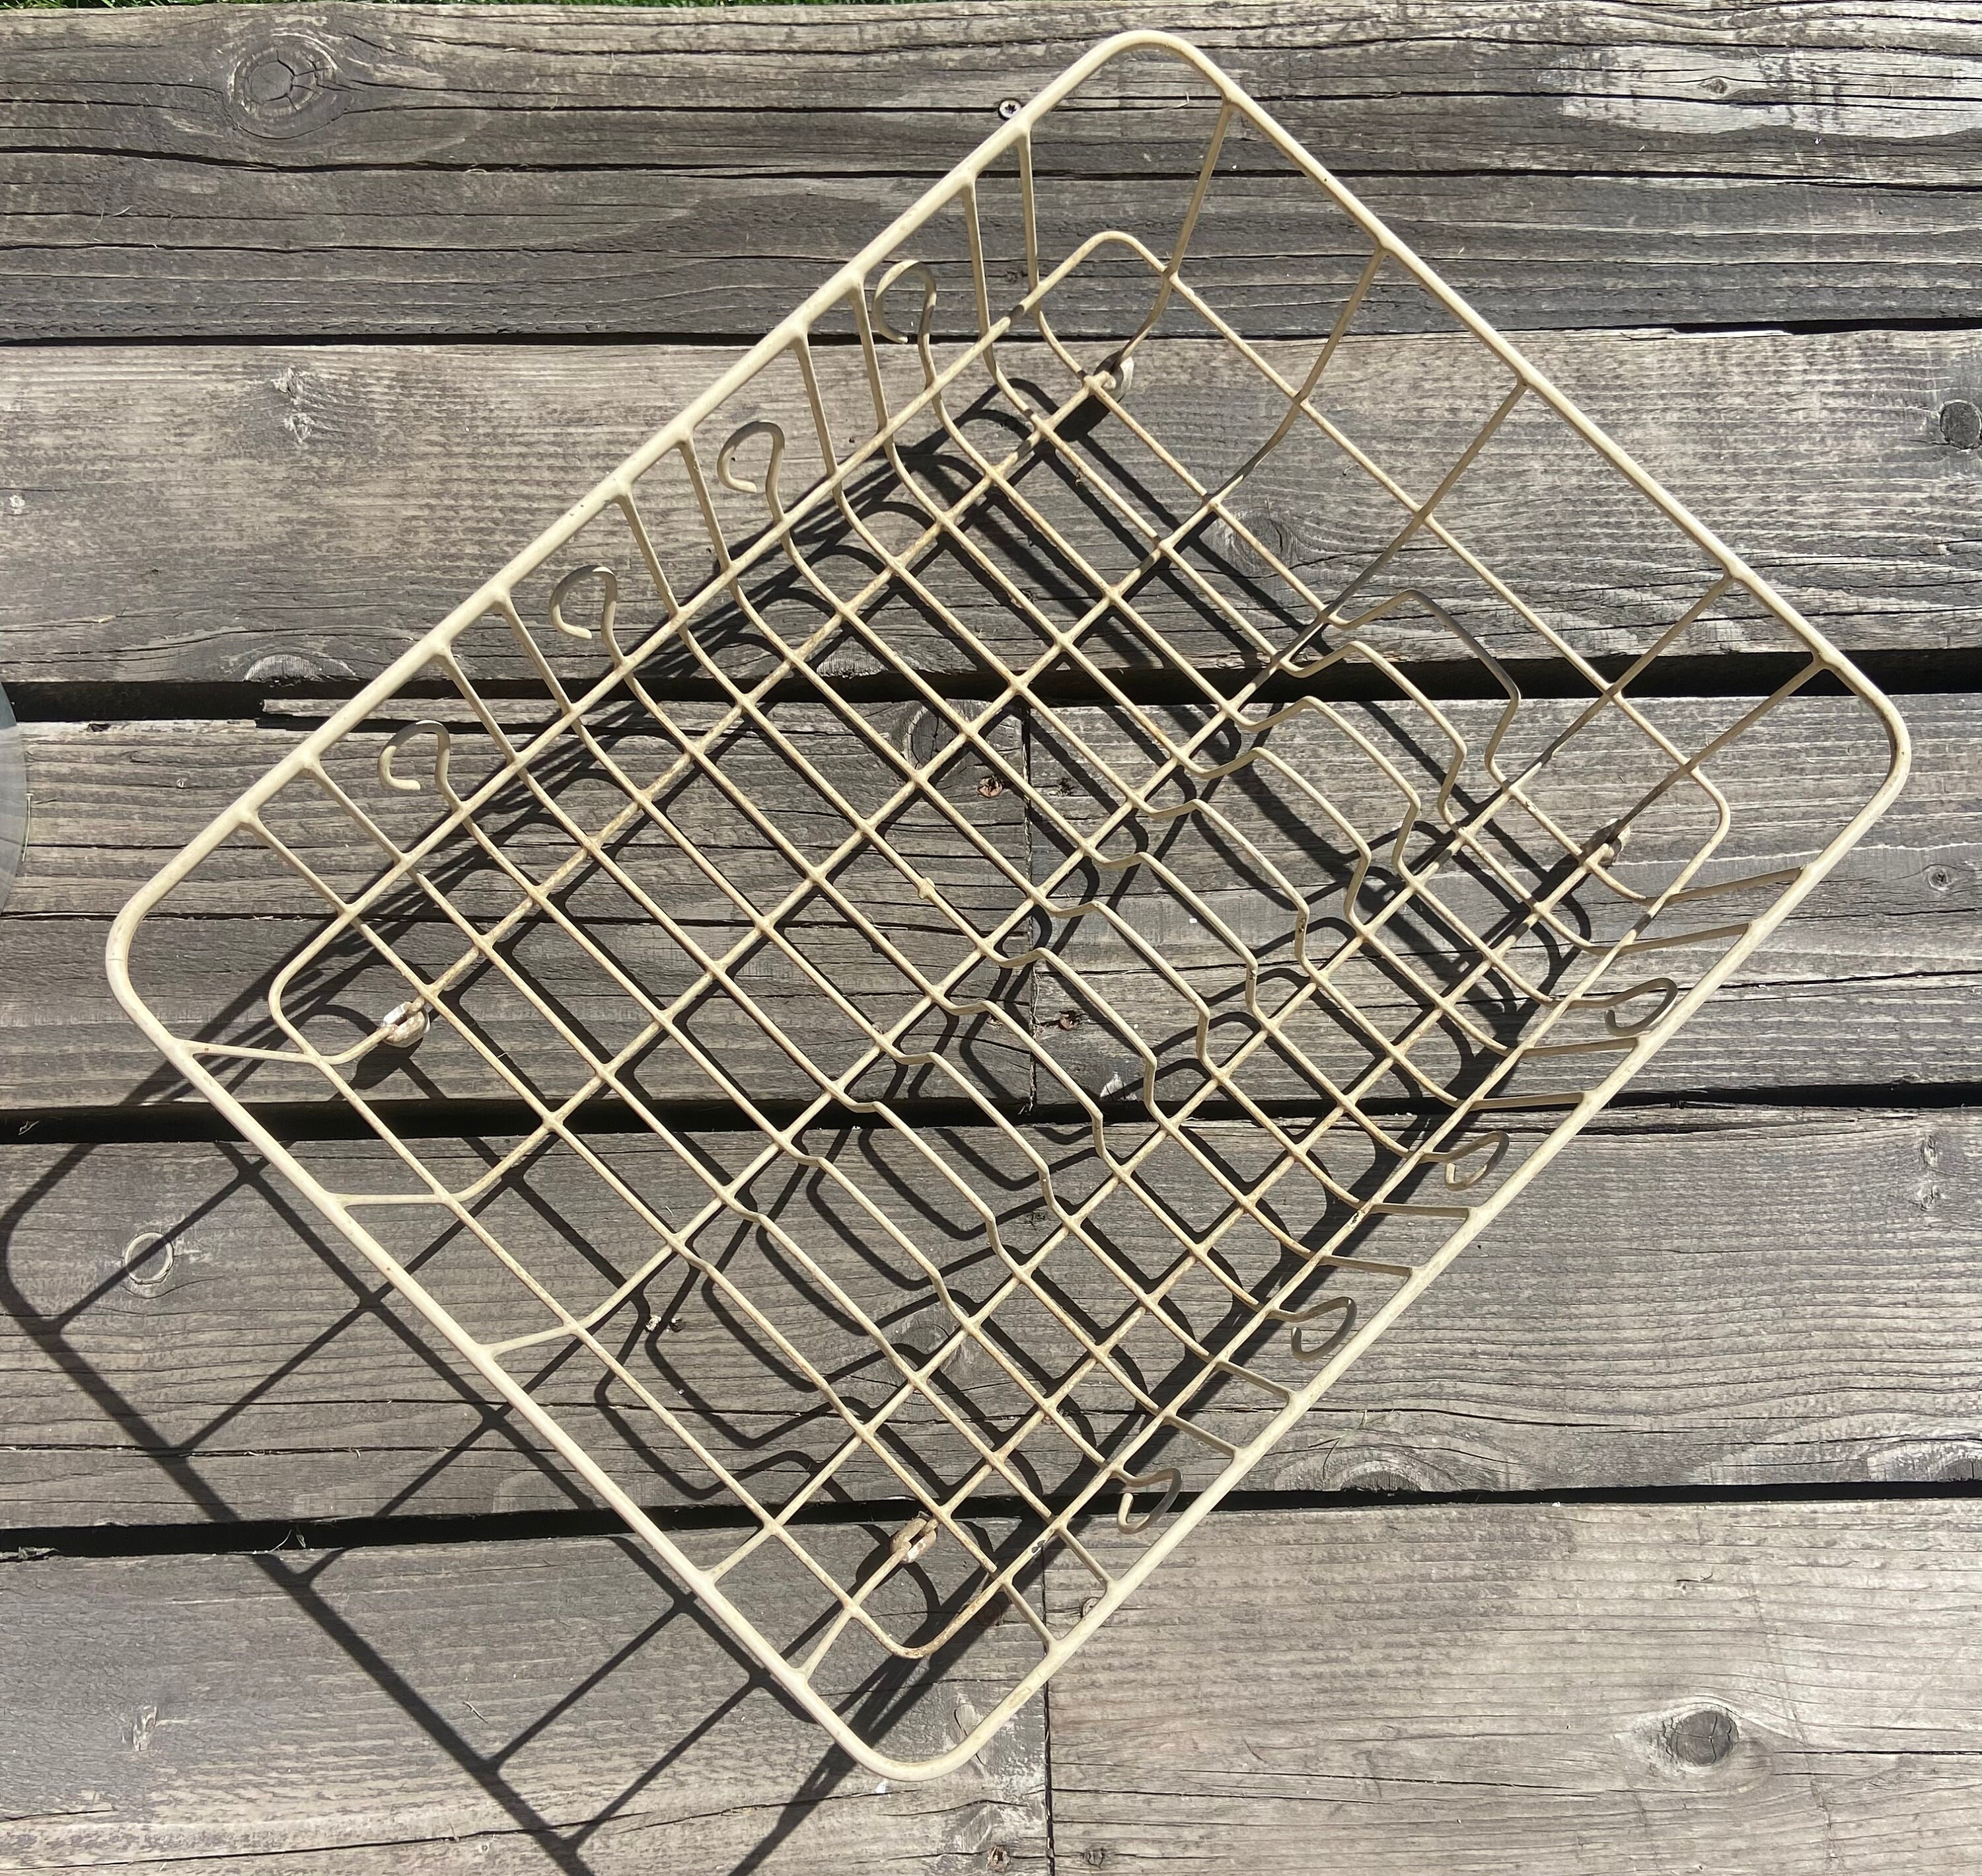 VTG Rubbermaid Dish Drainer Drying Coated Rack w/ Mat Tray & Rack 20x14